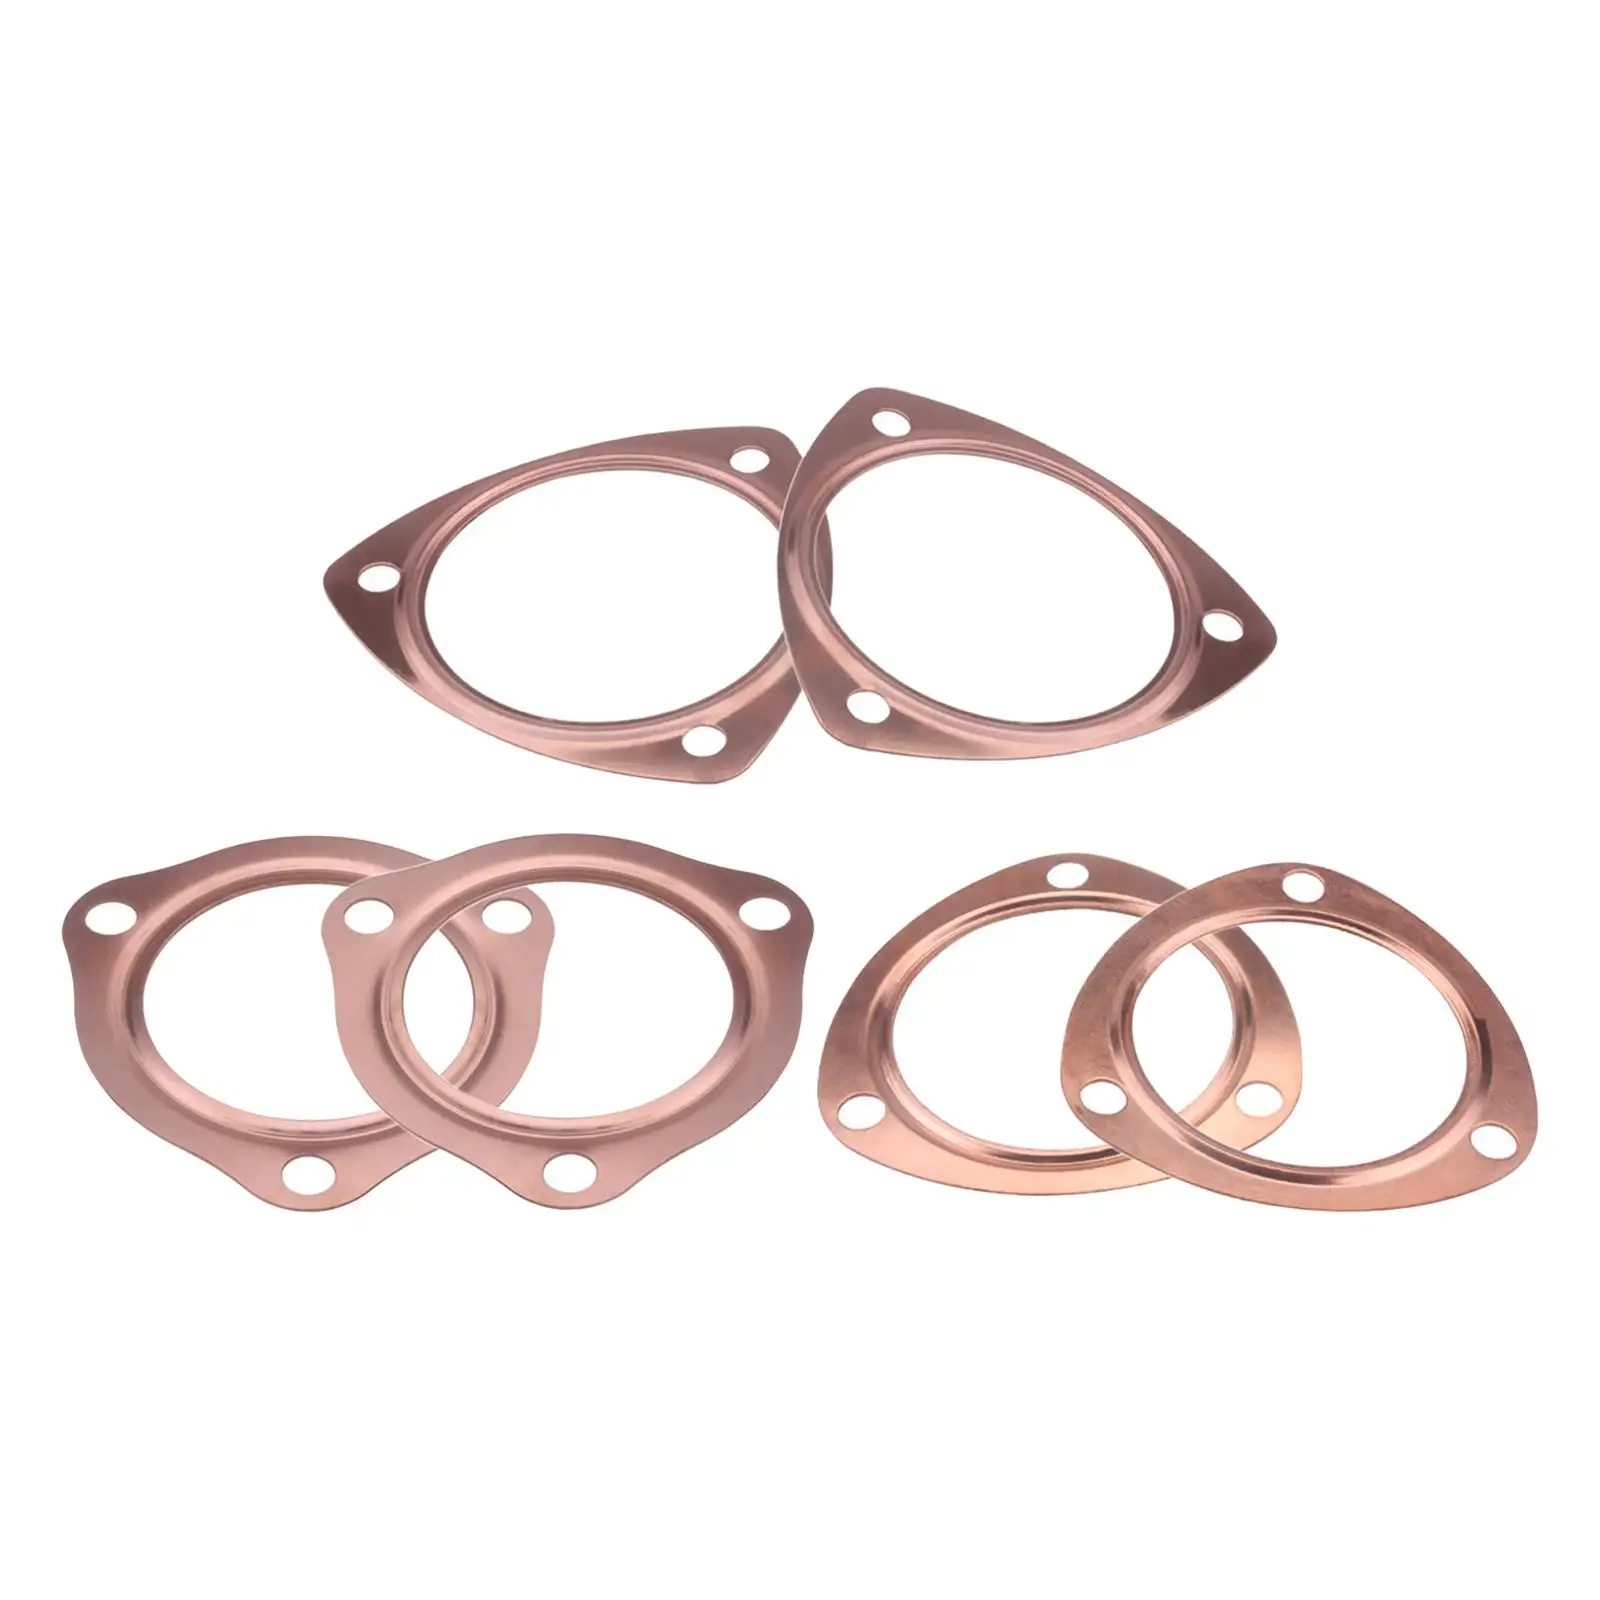 Copper Collector Gasket Anti Scratch Wear Resisting Anti Strike for Sbc Bbc 302 350 454 Car Direct Replaces Spare Parts